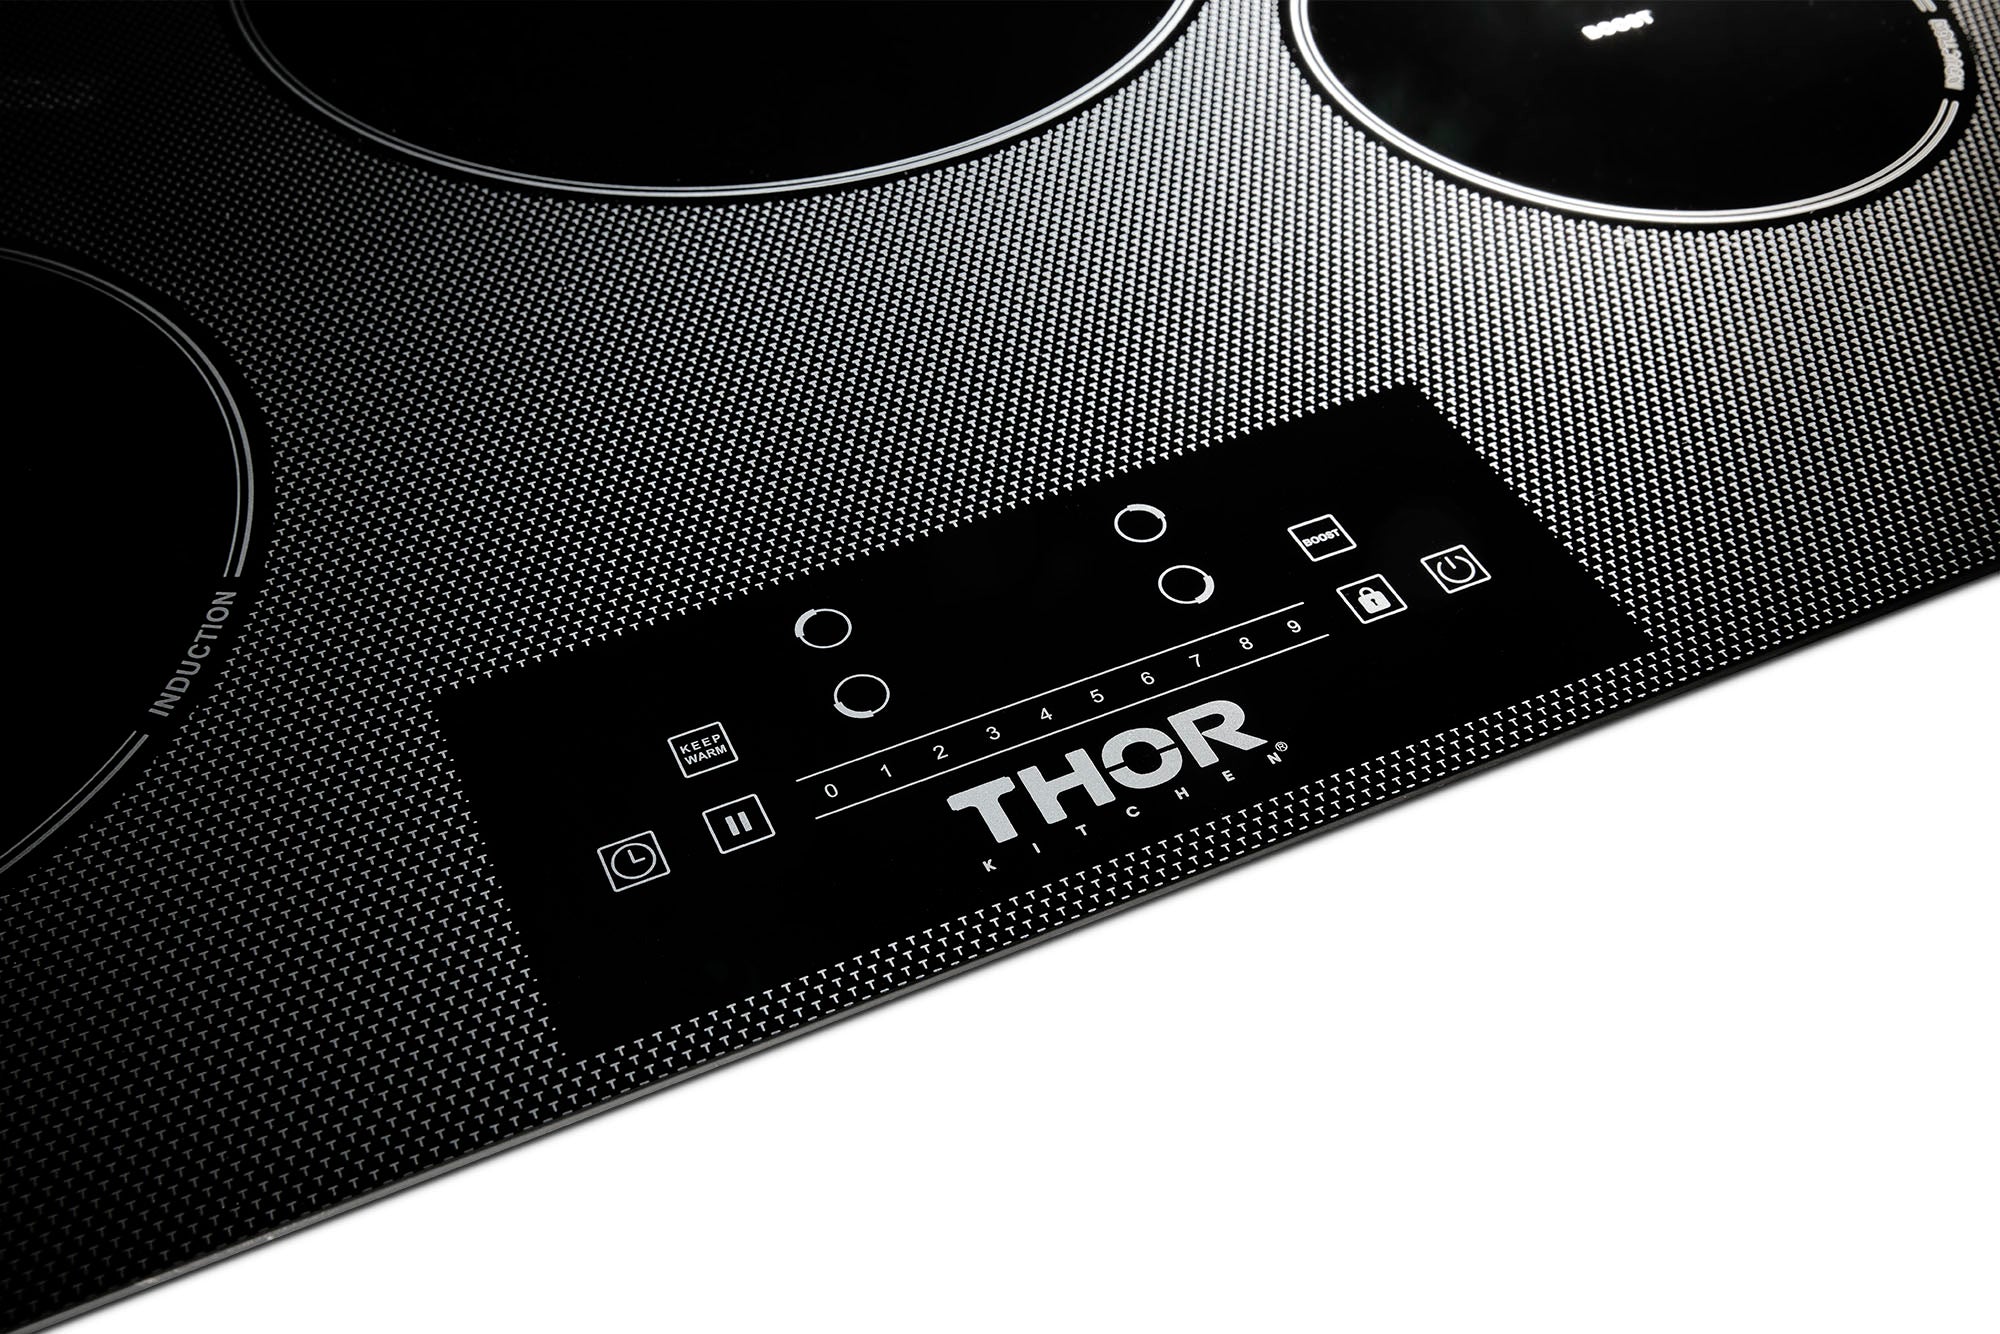 Thor Kitchen 30 Professional Electric Cooktop (TEC30)